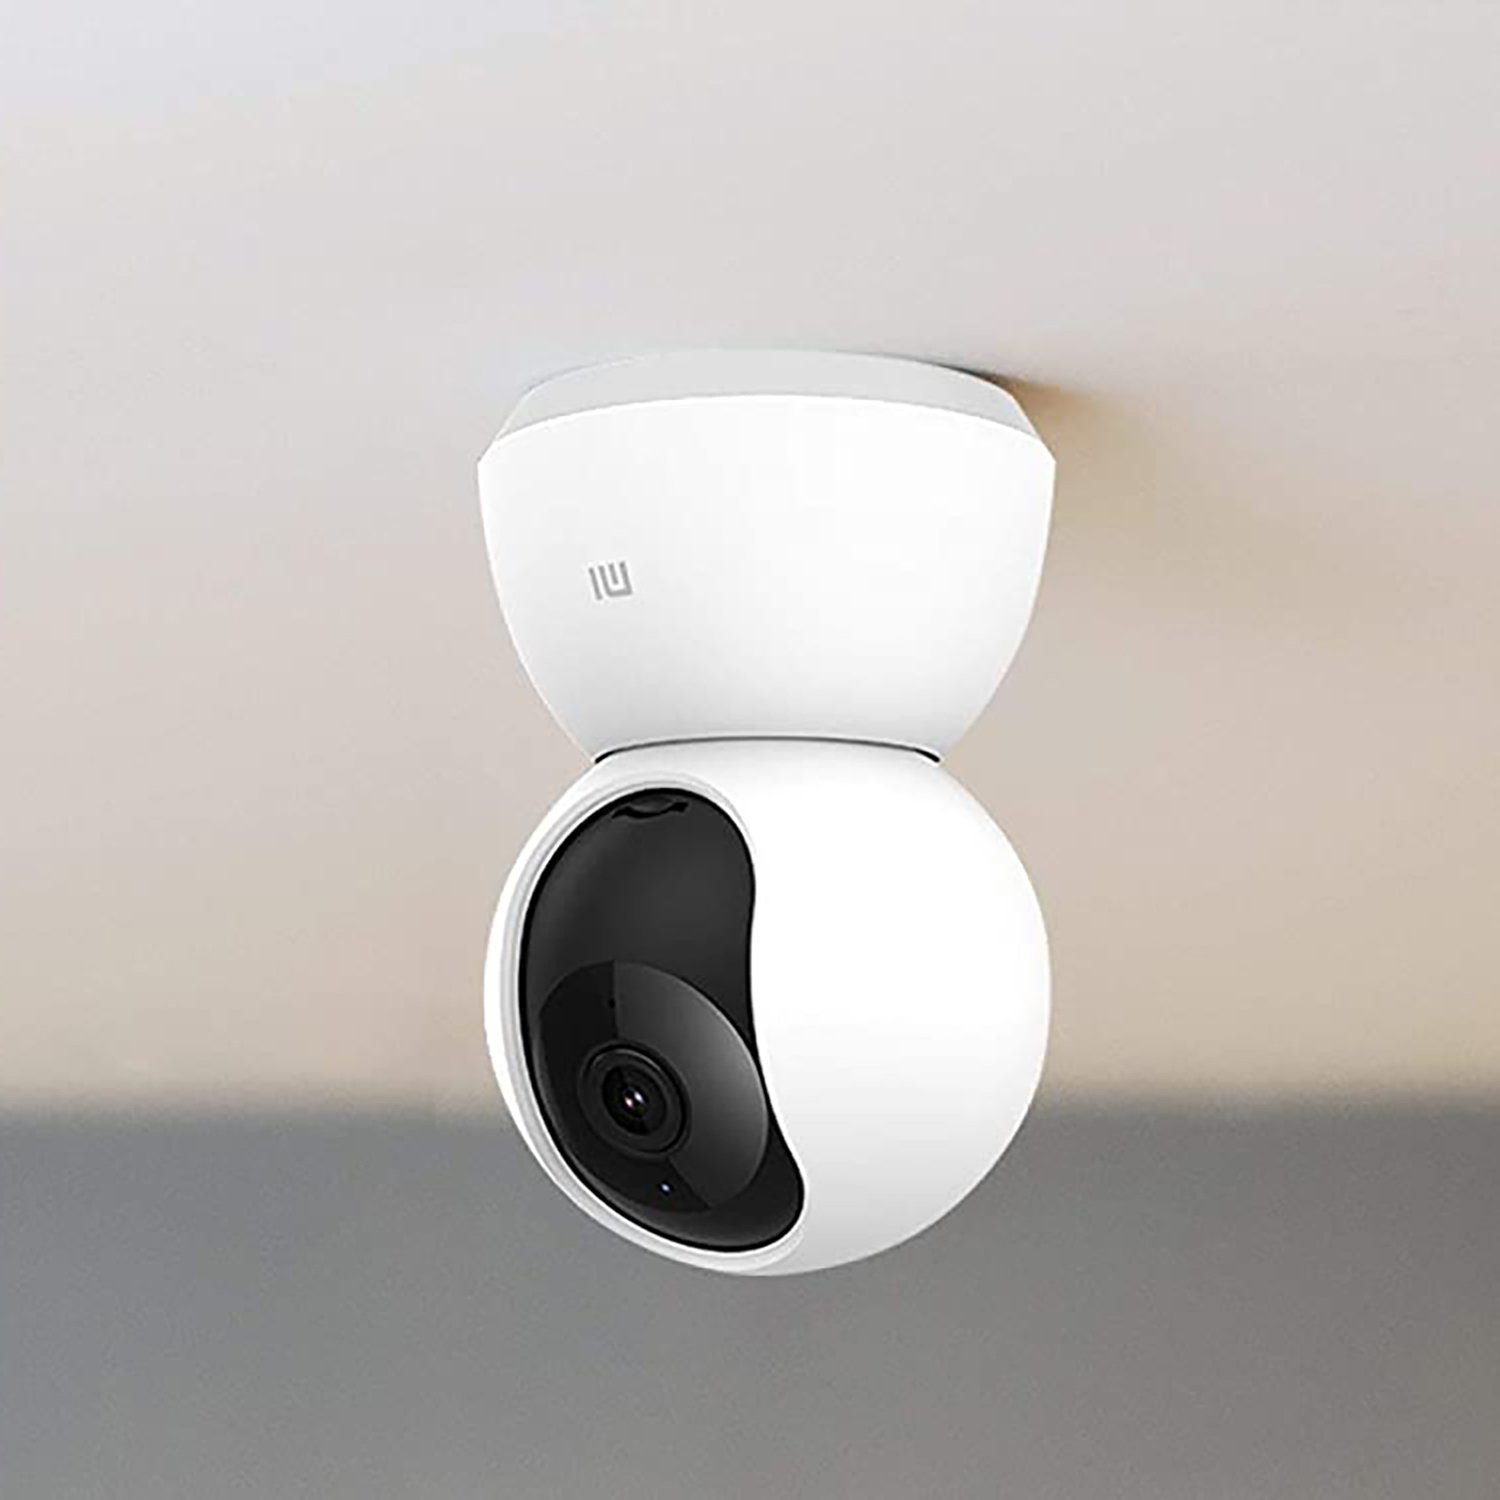 Xiaomi Mijia PTZ 2K Home Security Camera 360° CCTV 1080P Full HD with Infrared Night Funsion, White Default Xiaomi 